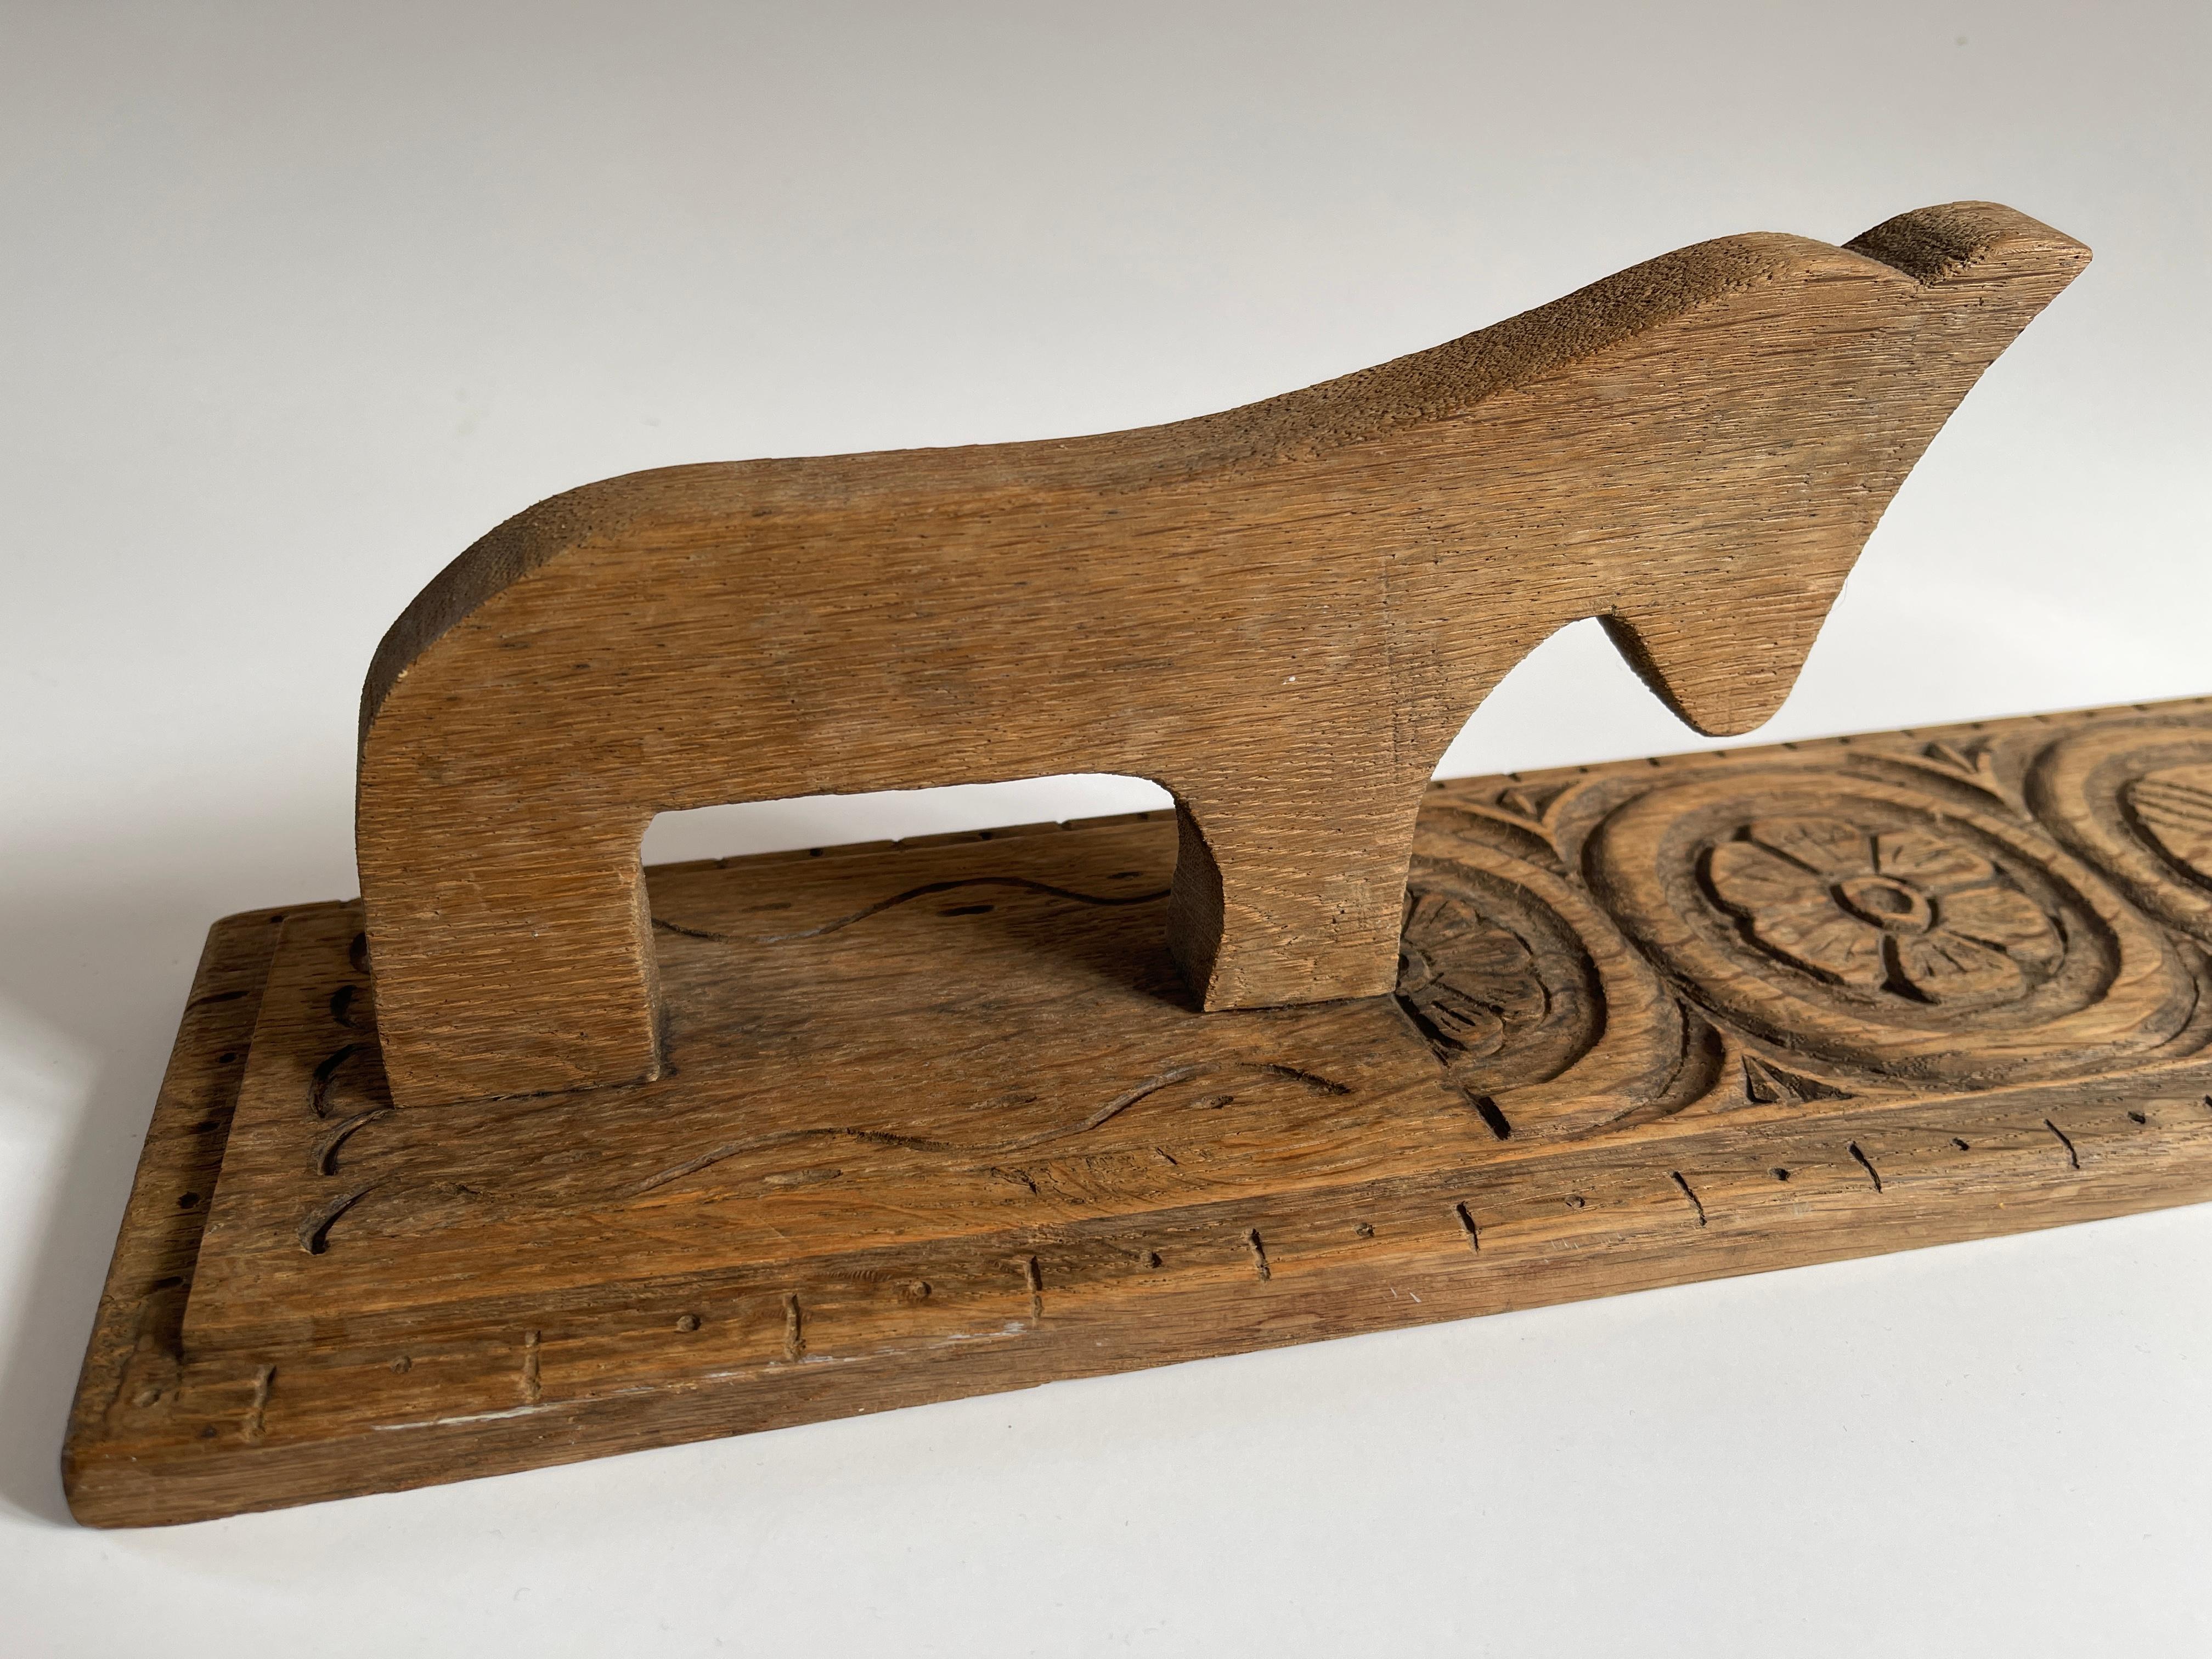 Scandinavian folk art mangle board, hand carved oak with traditional designs. Carved wooden horse was used as handle for pressing linen.
Mangle boards were given as a wedding gift from the groom to the bride. The suitor would hang the board on the